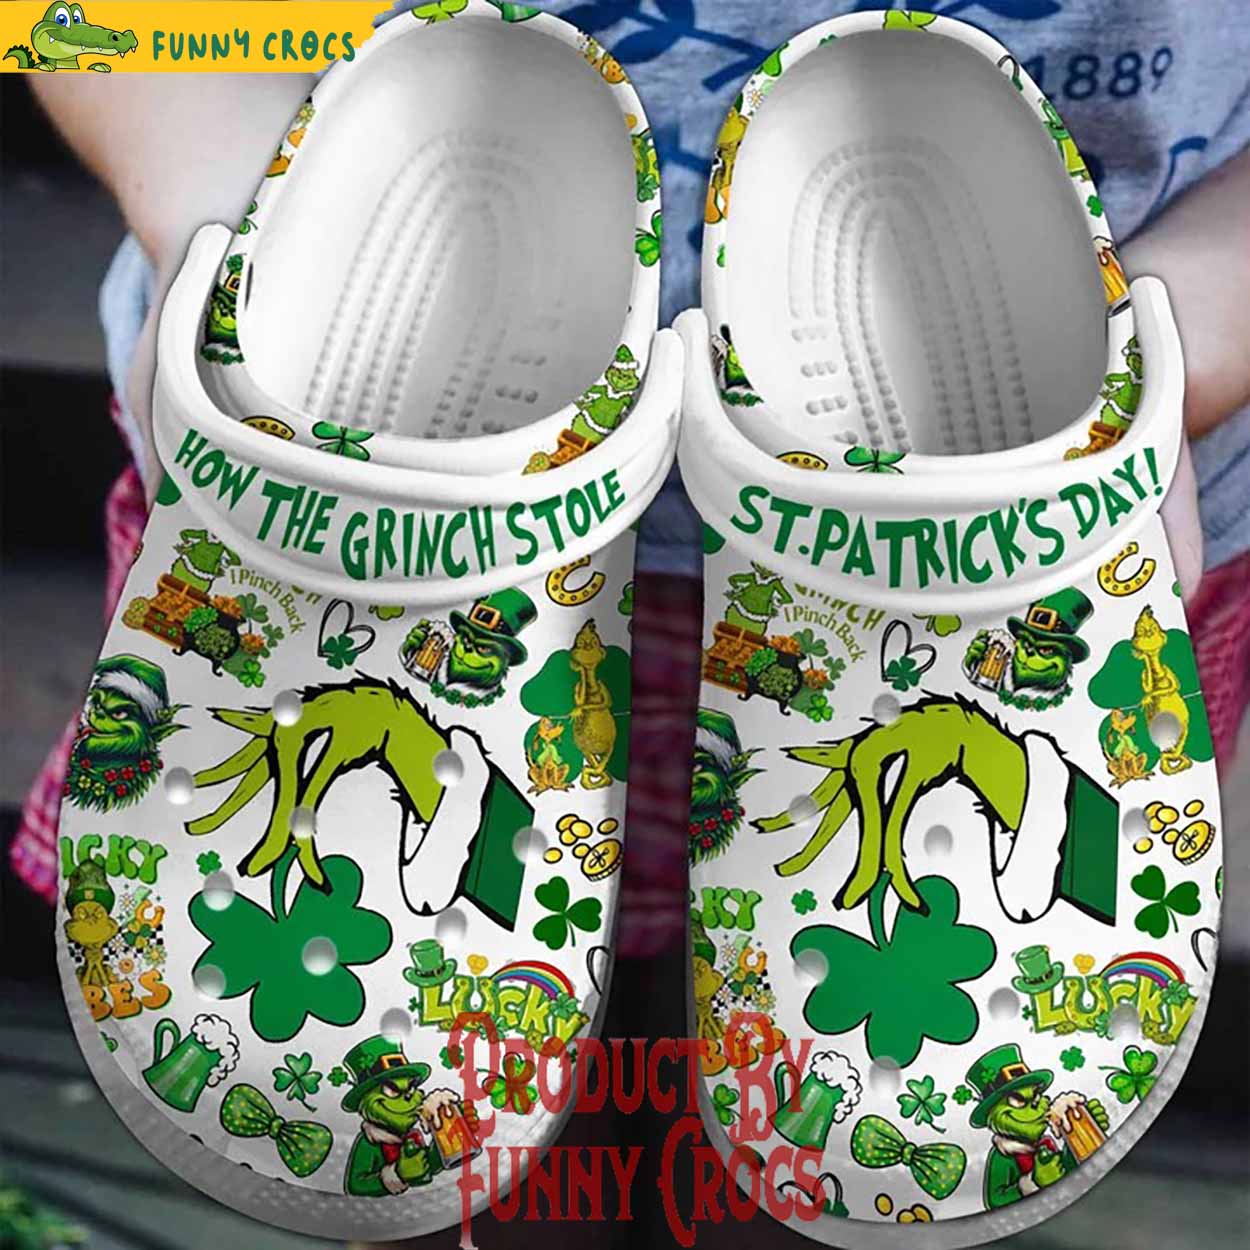 How The Grinch Stole Happy St.Patrick's Day Crocs Shoes